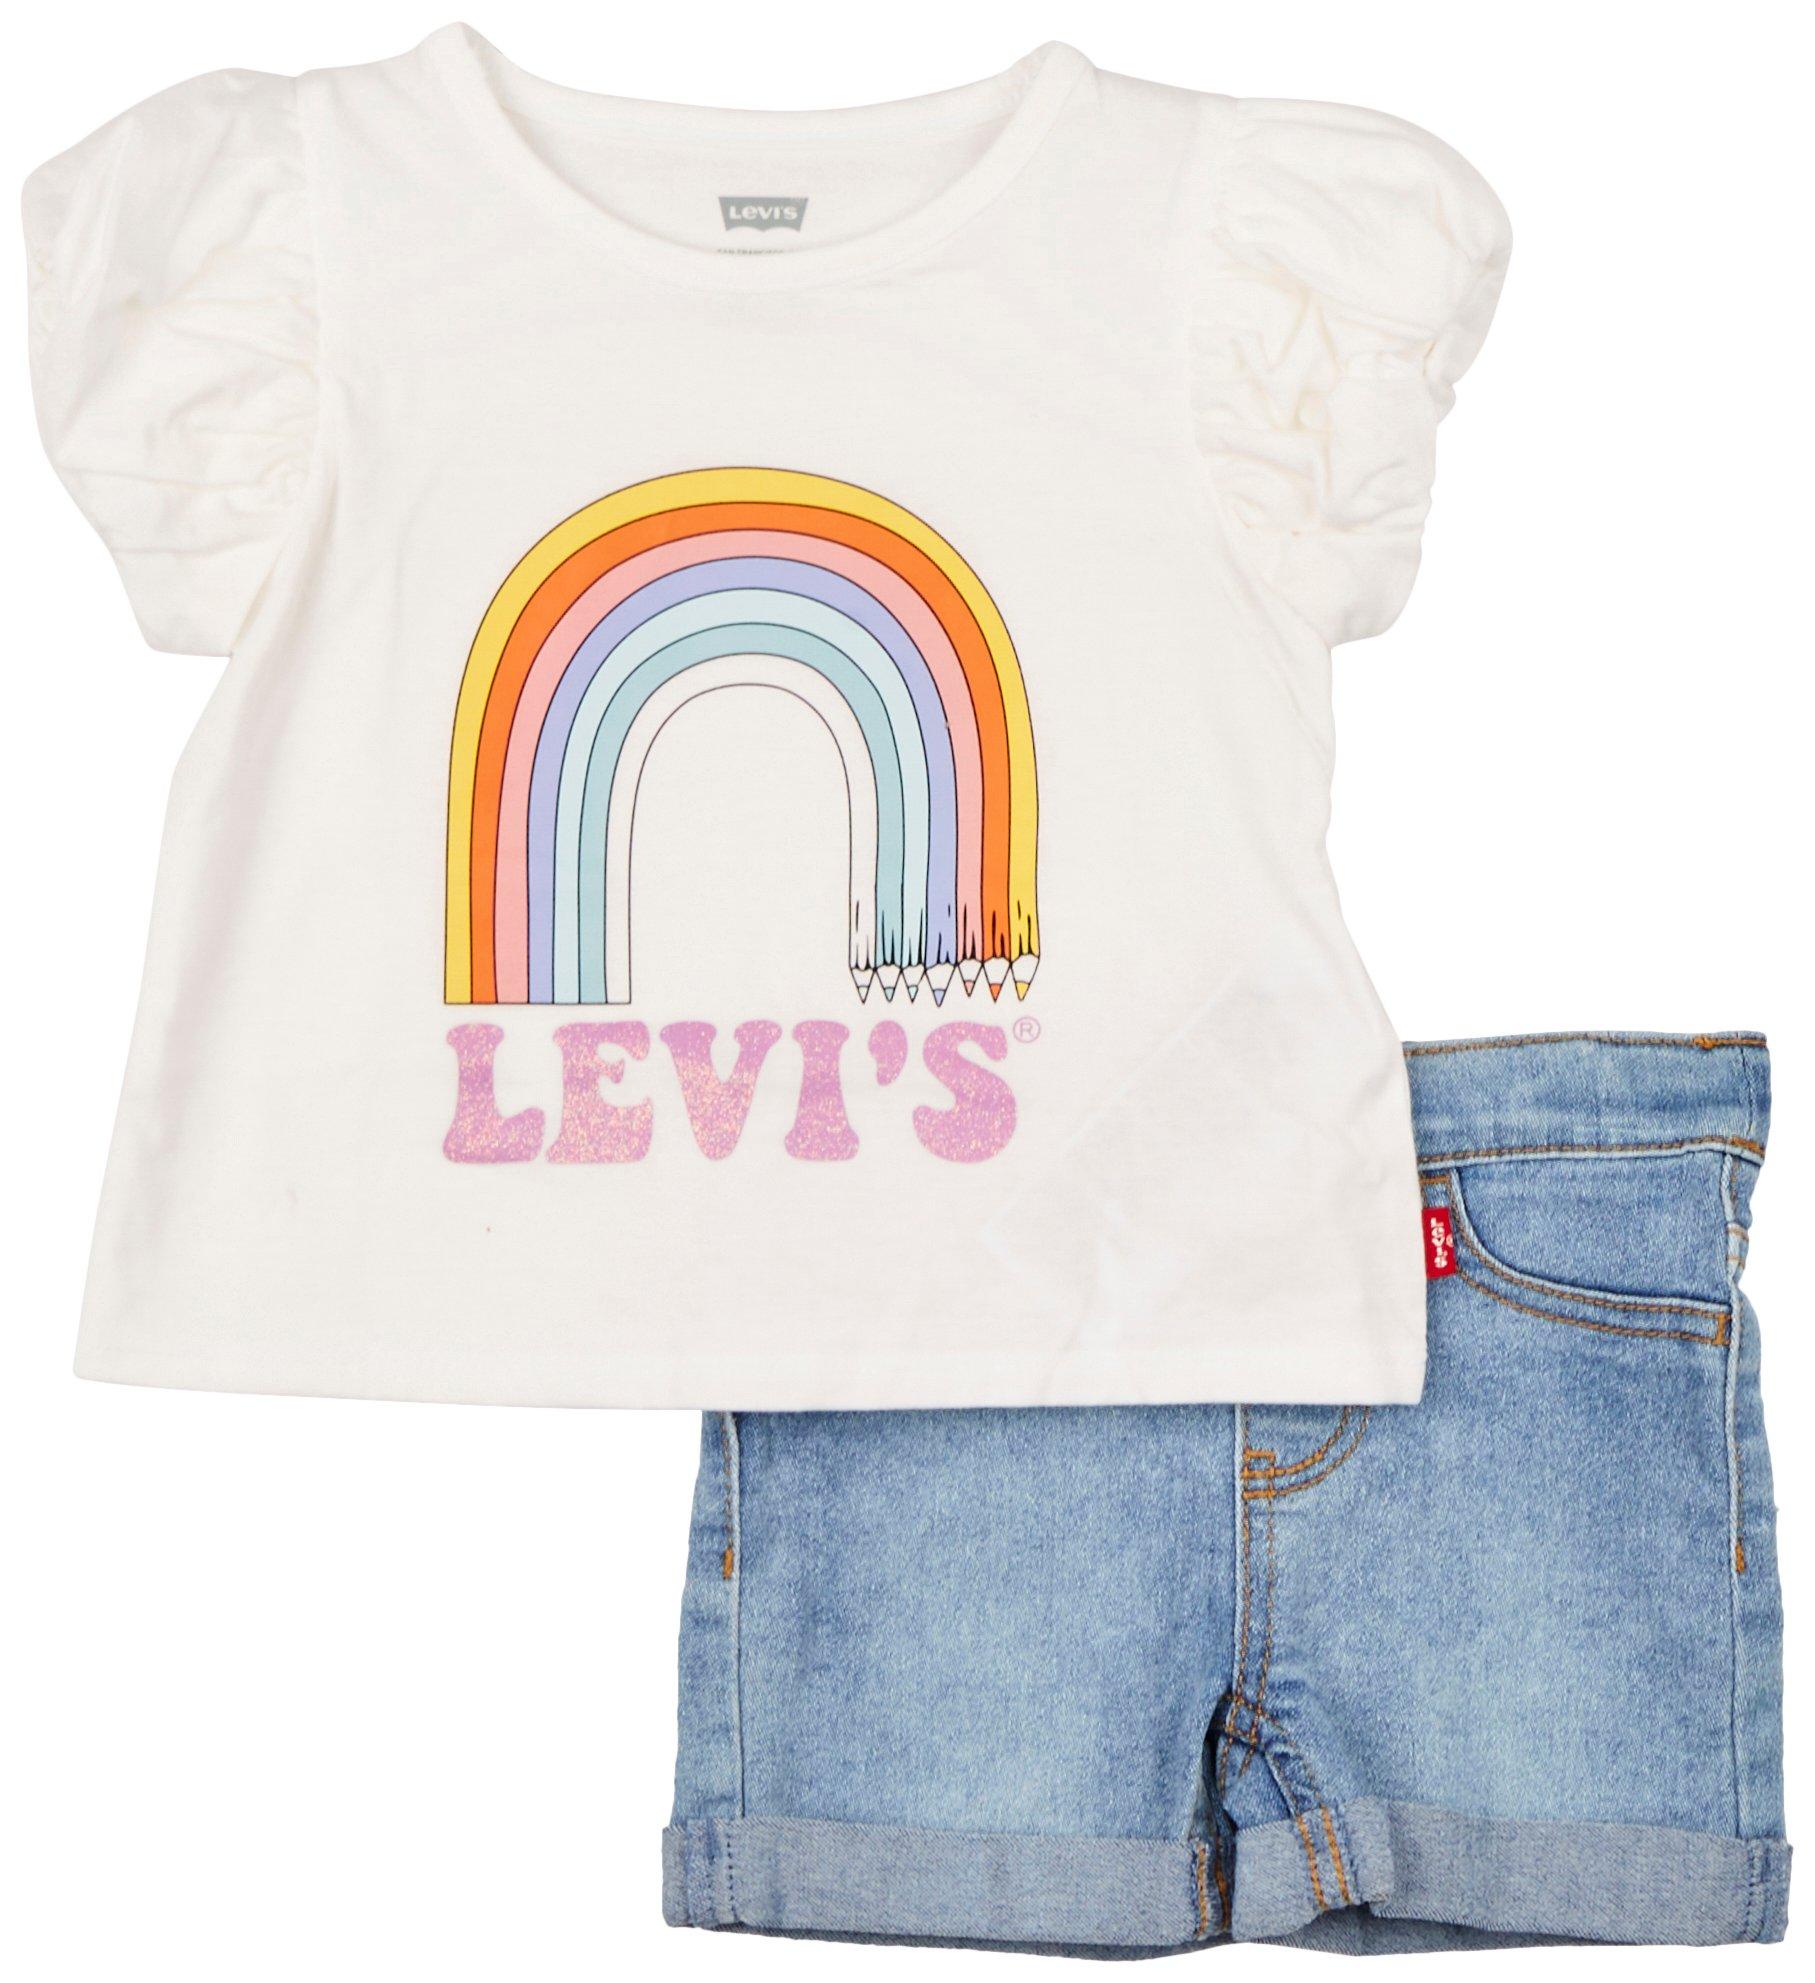 Levi's Toddler Girls 2 pc. Rainbow Top And